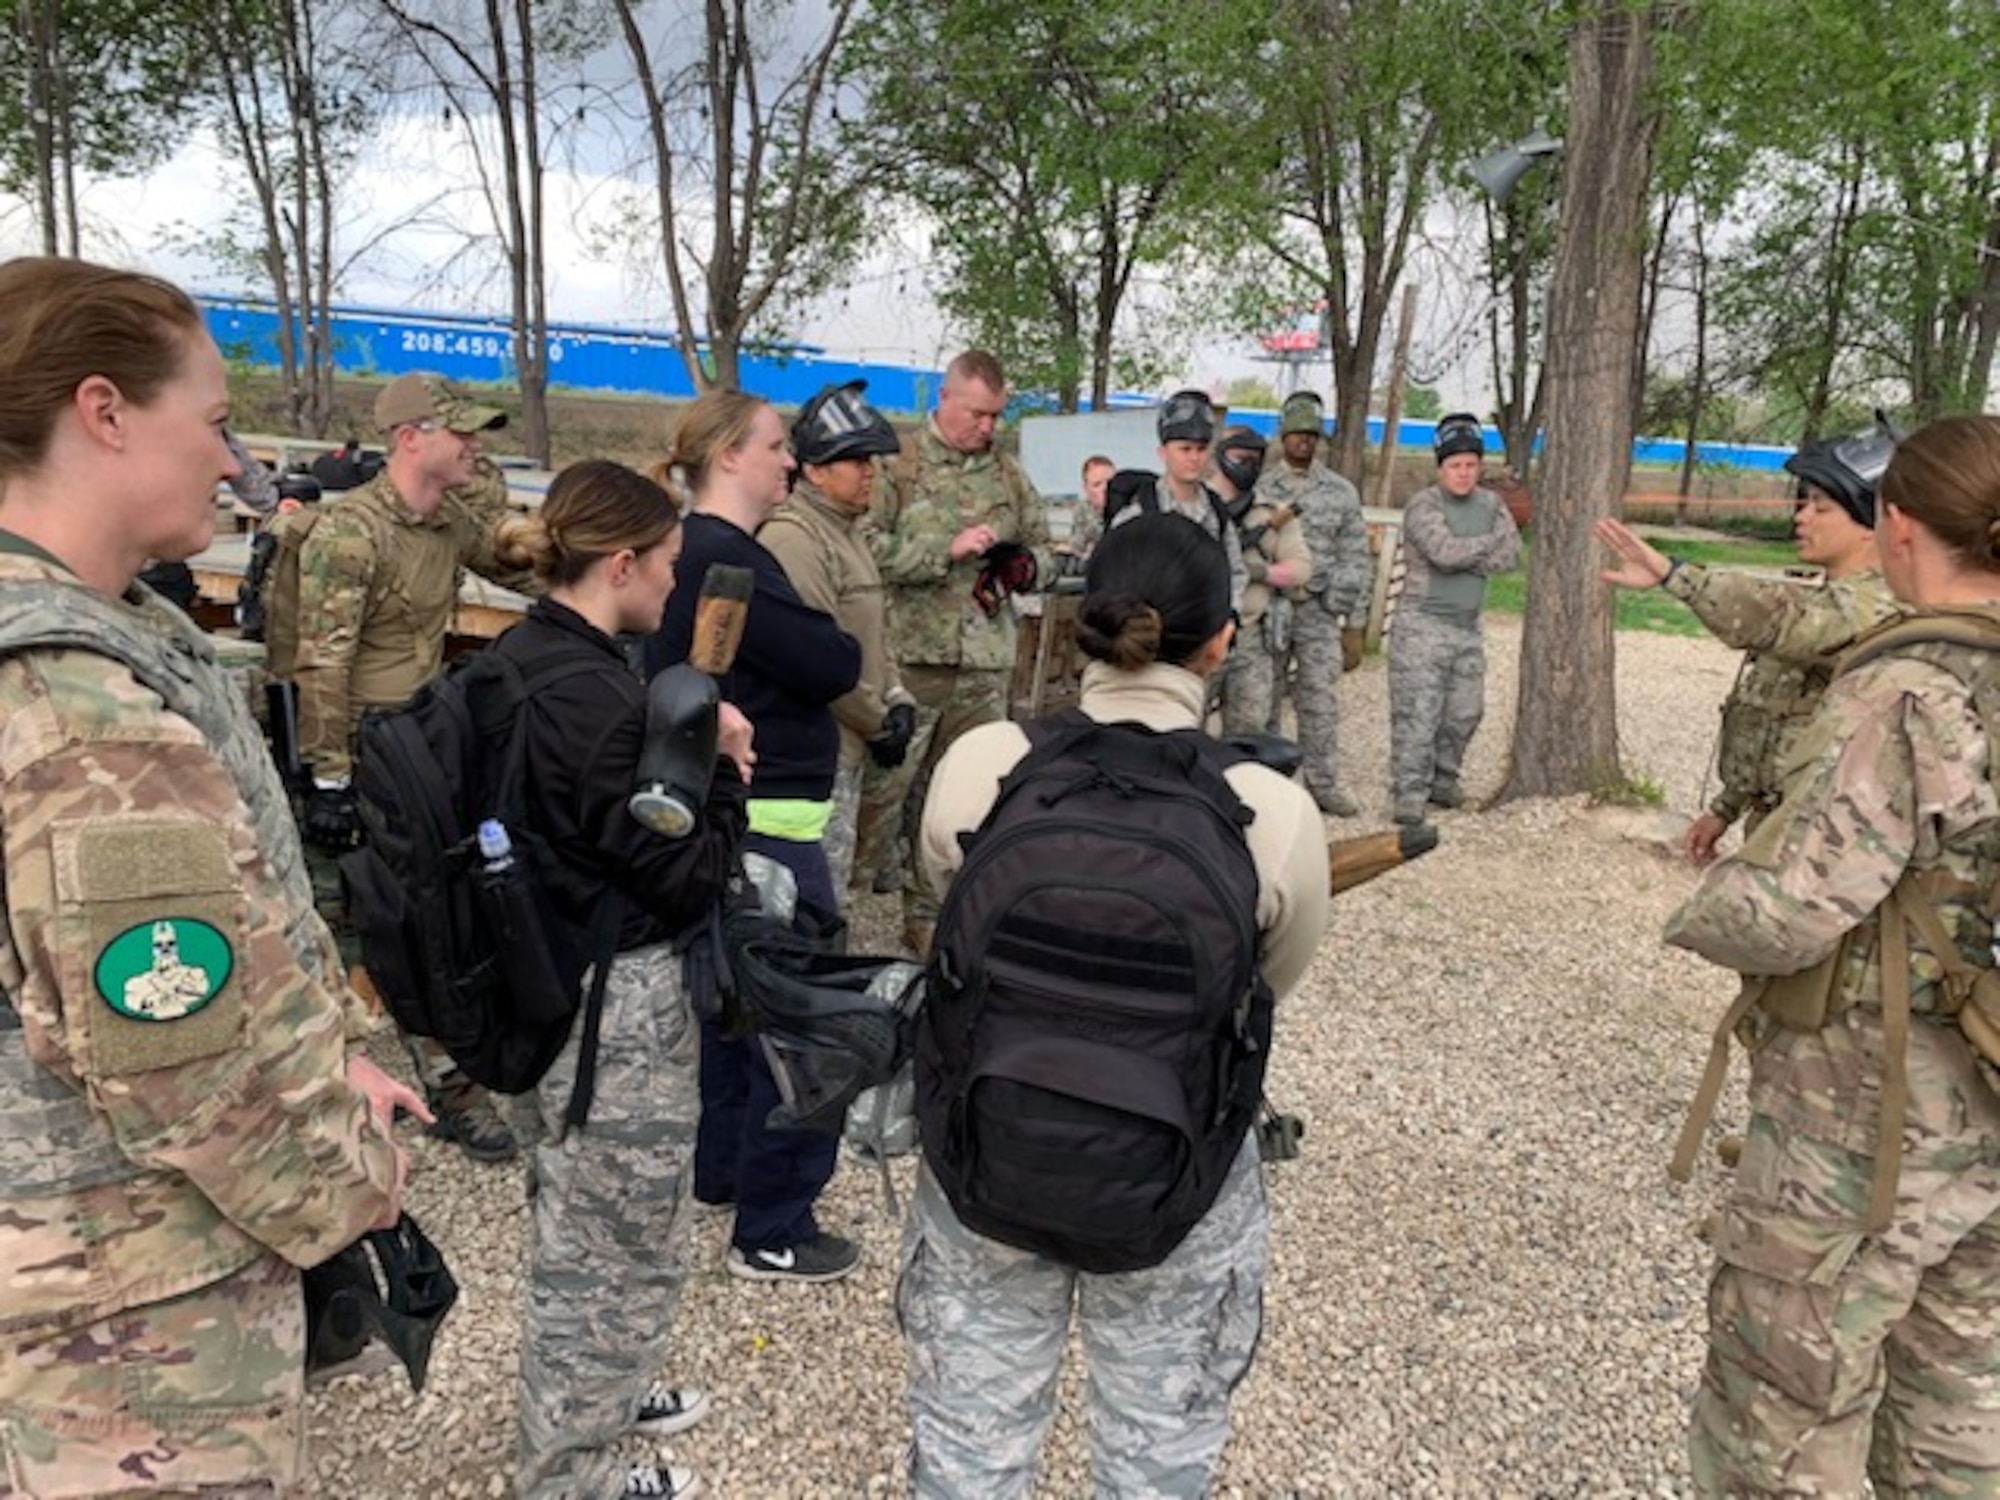 U.S. Air Force Airmen debrief after a combat medical care exercise near Mountain Home Air Force Base, Idaho. The 366th Operations Medical Readiness Squadron created a field response training program to ensure Air Force medics receive realistic care-under-fire training so they’re ready to save lives down-range. (Courtesy photo)